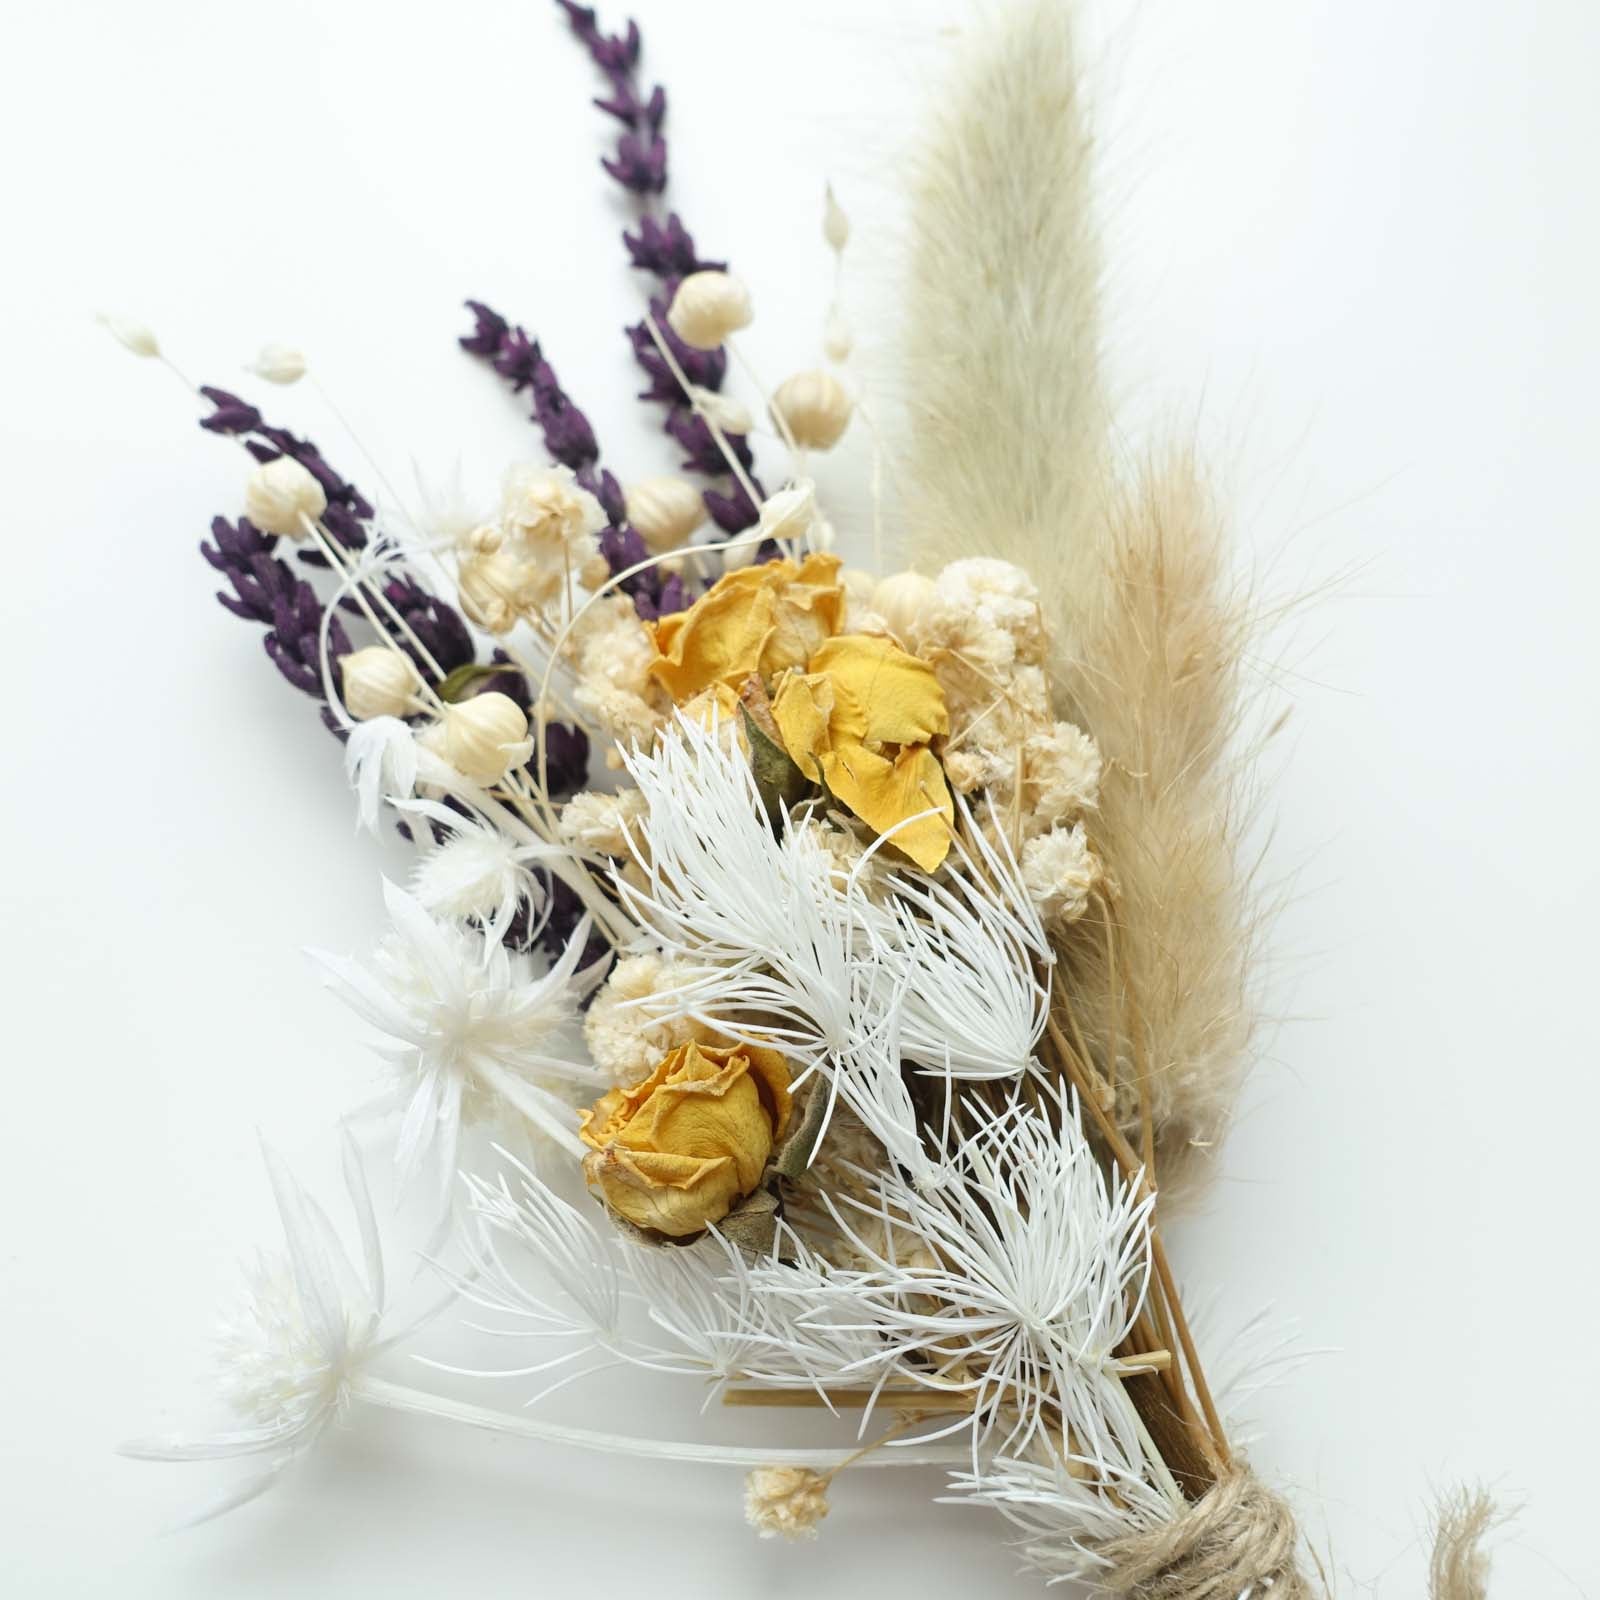 rustic natural vintage dried flower posy boutonniere wedding wax seal fiona ariva australia baby's breath lavender